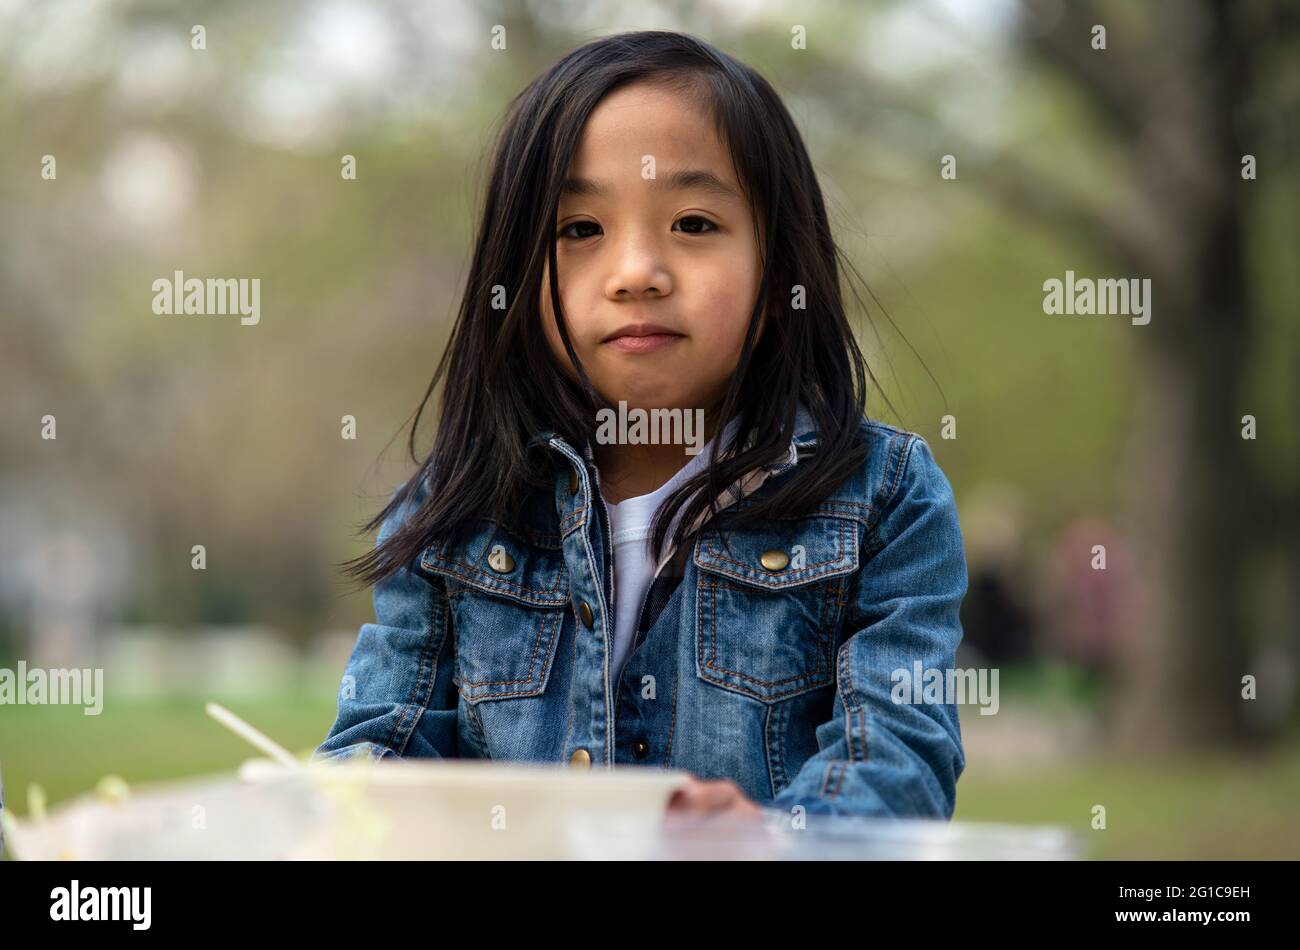 Small child looking at camera outdoors in city park, learning group education concept. Stock Photo